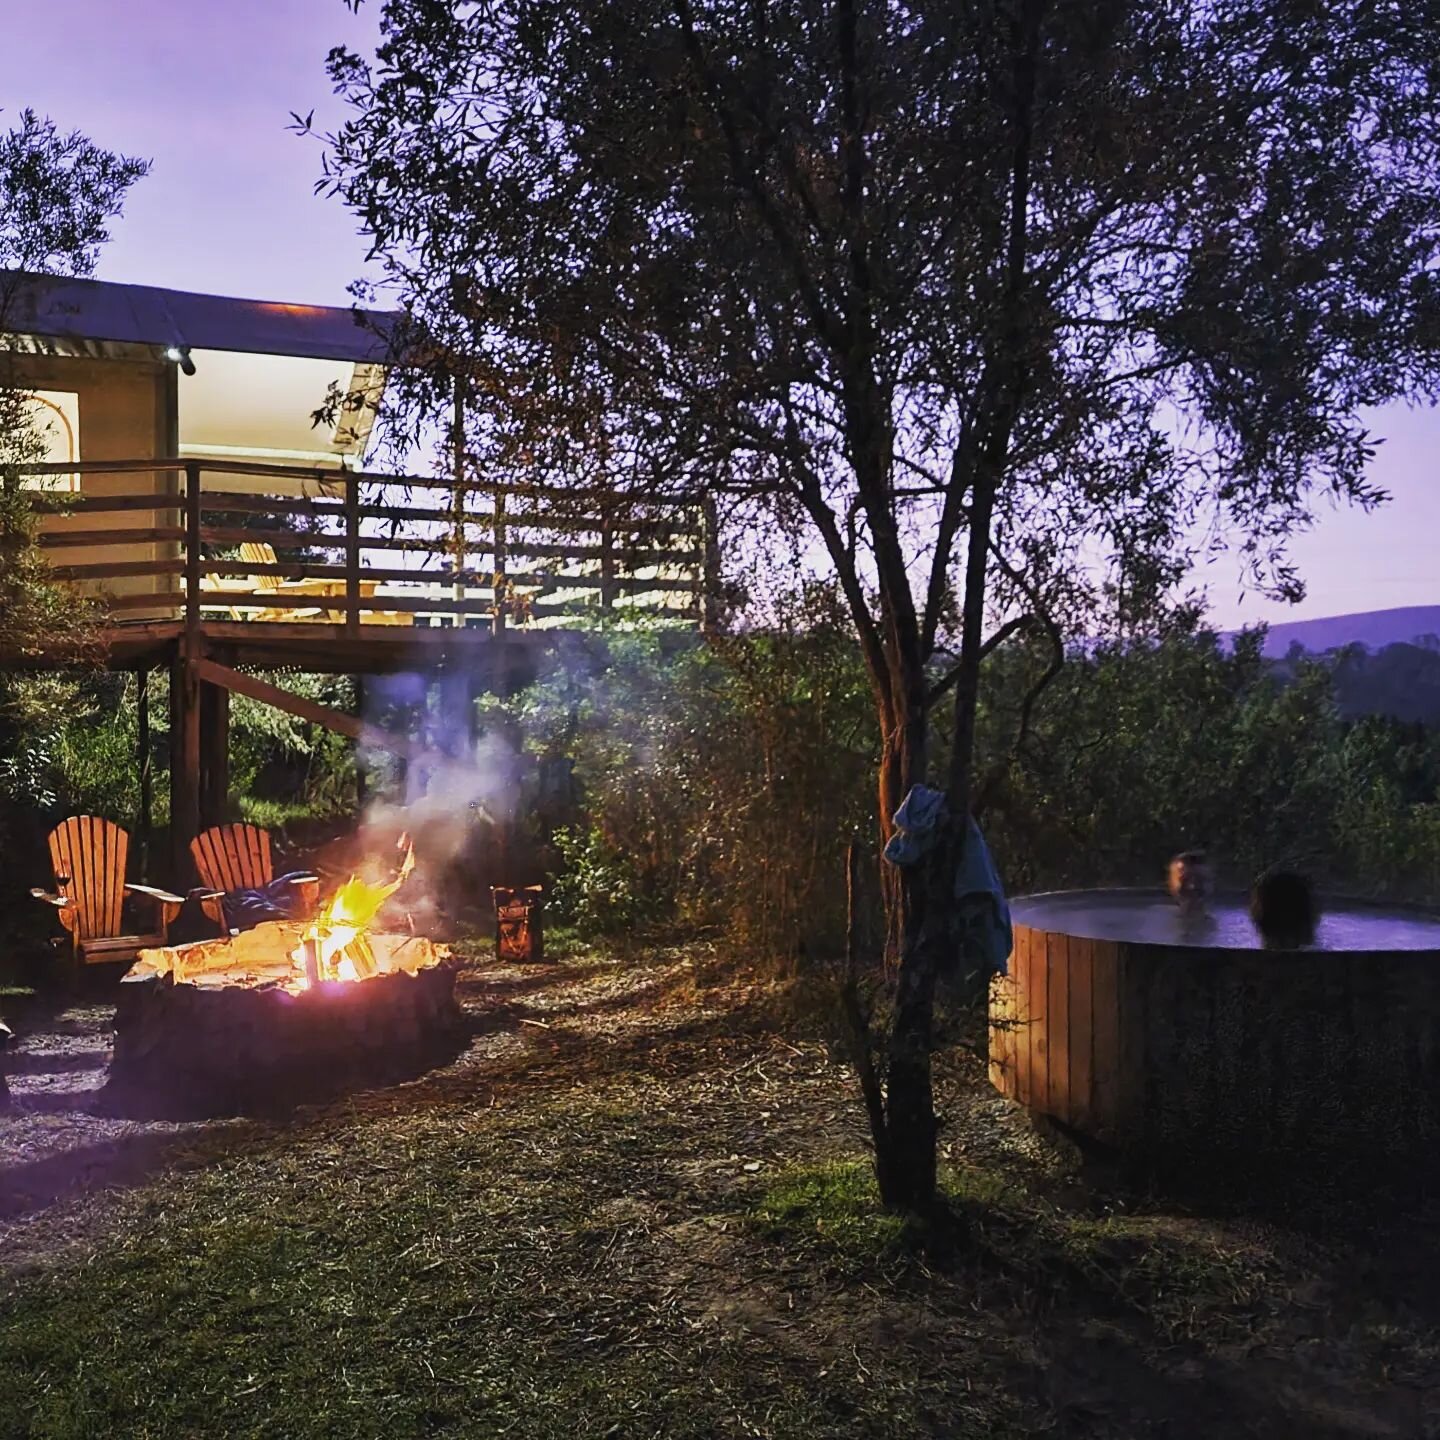 Hottubs and campfires at @africamps_sa mark a fine end to a remarkable Sourh African road trip. Five provinces, 5000(+)kms, 21 nights and a cross-section of incredible scenery and experiences.